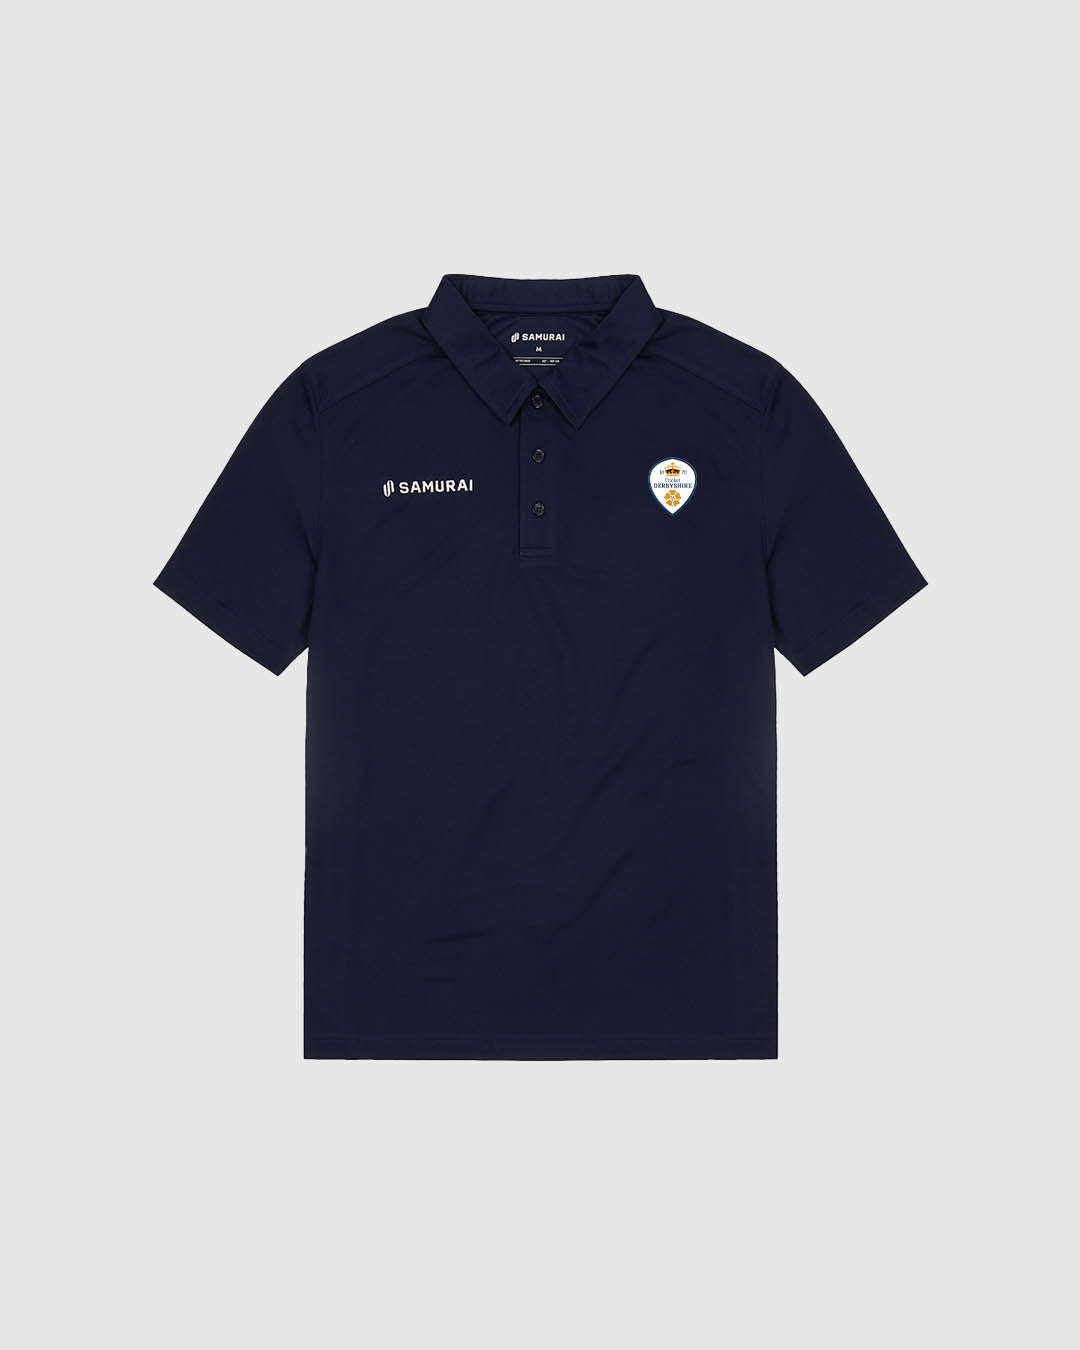 Derbyshire CCC - EP:0111 - Performance Polo 2.1 - Navy